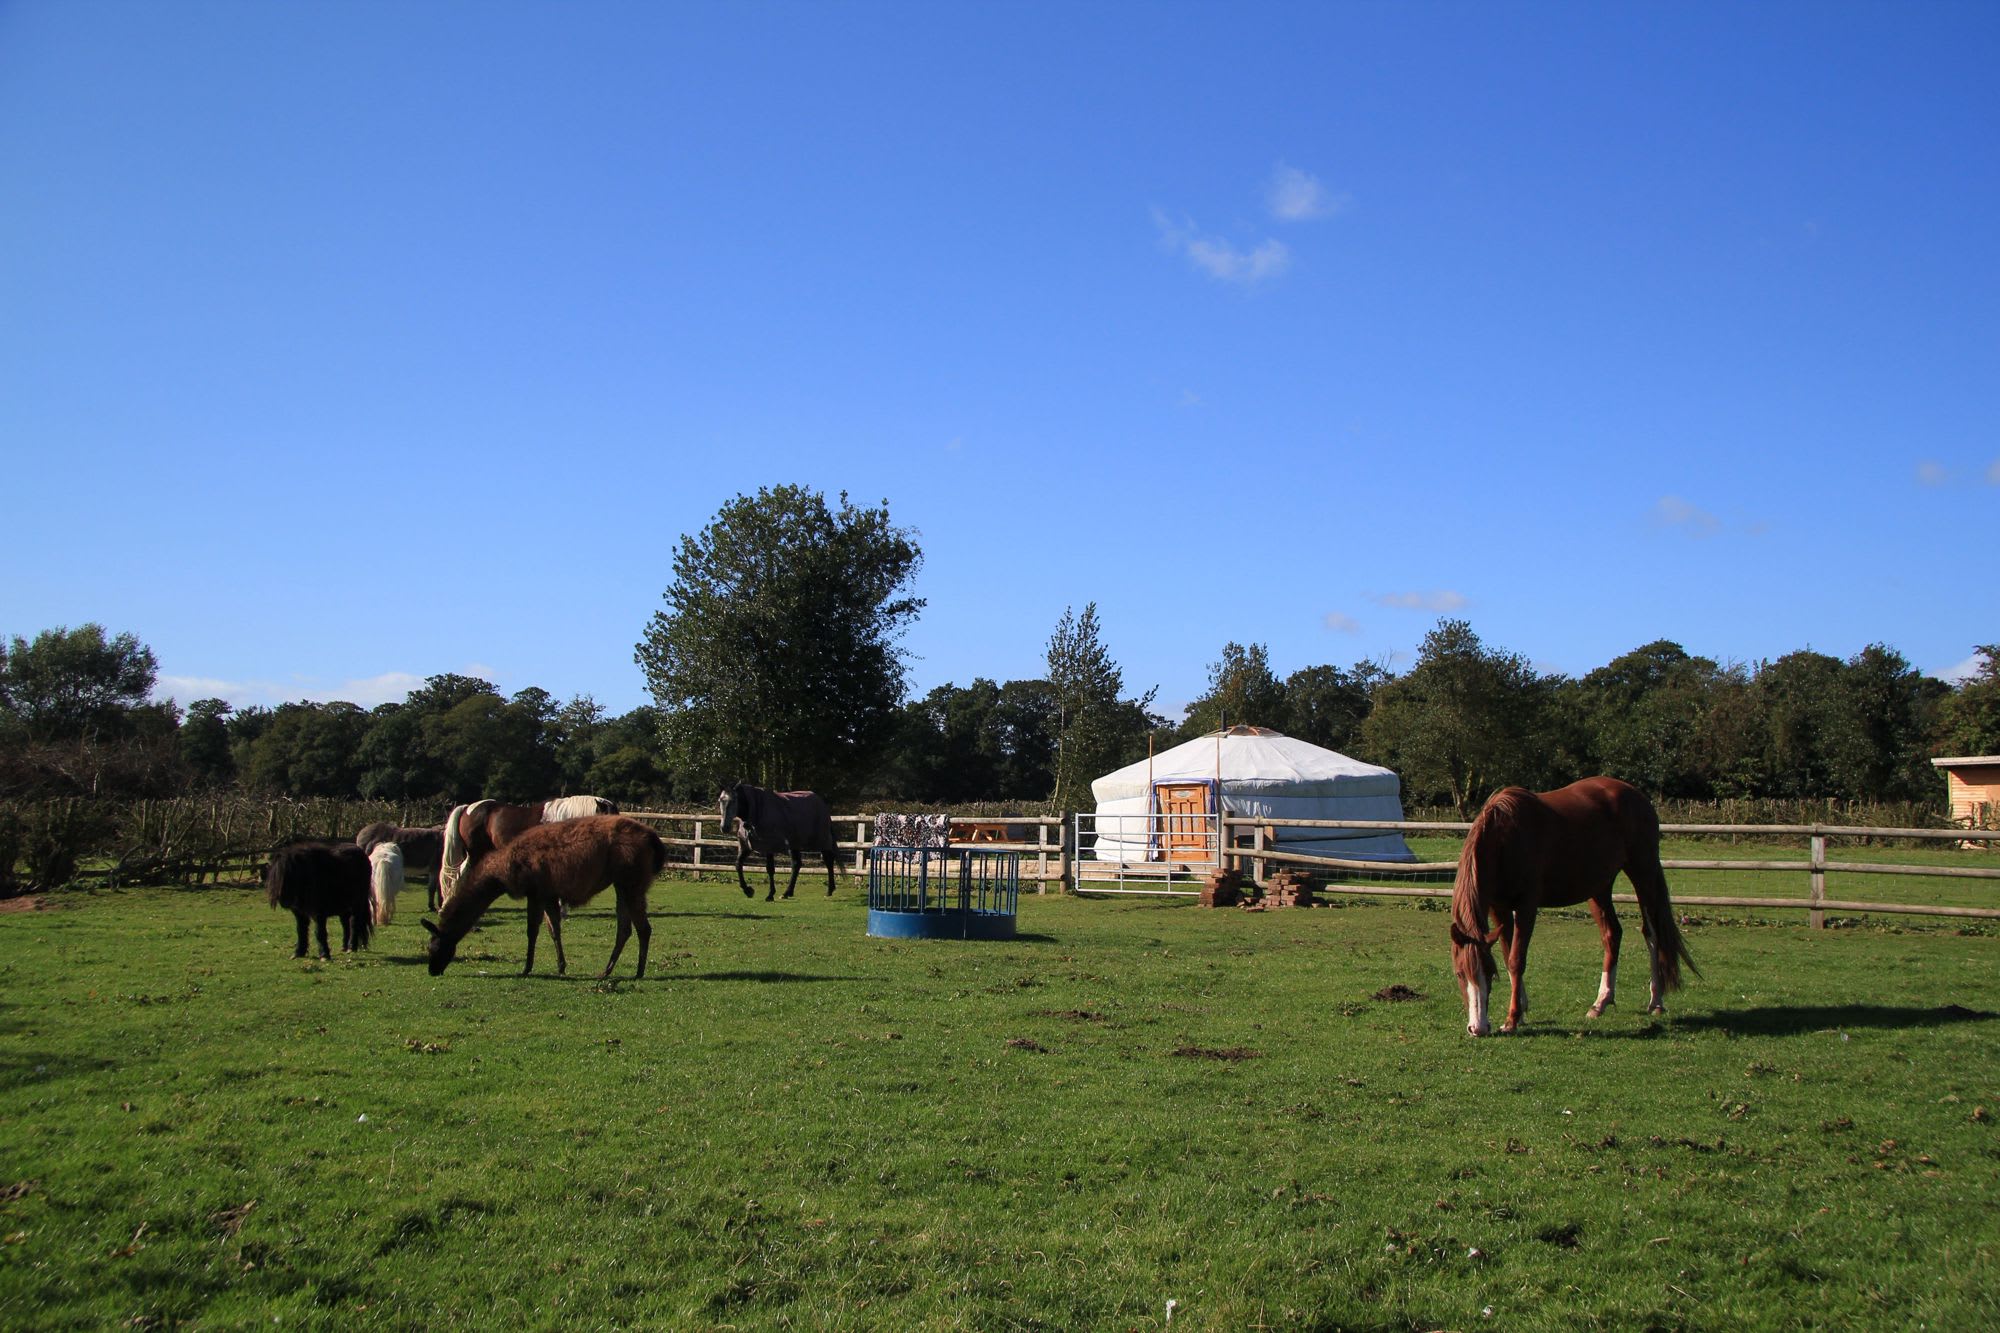 Farmyard glamping; what’s not to love?